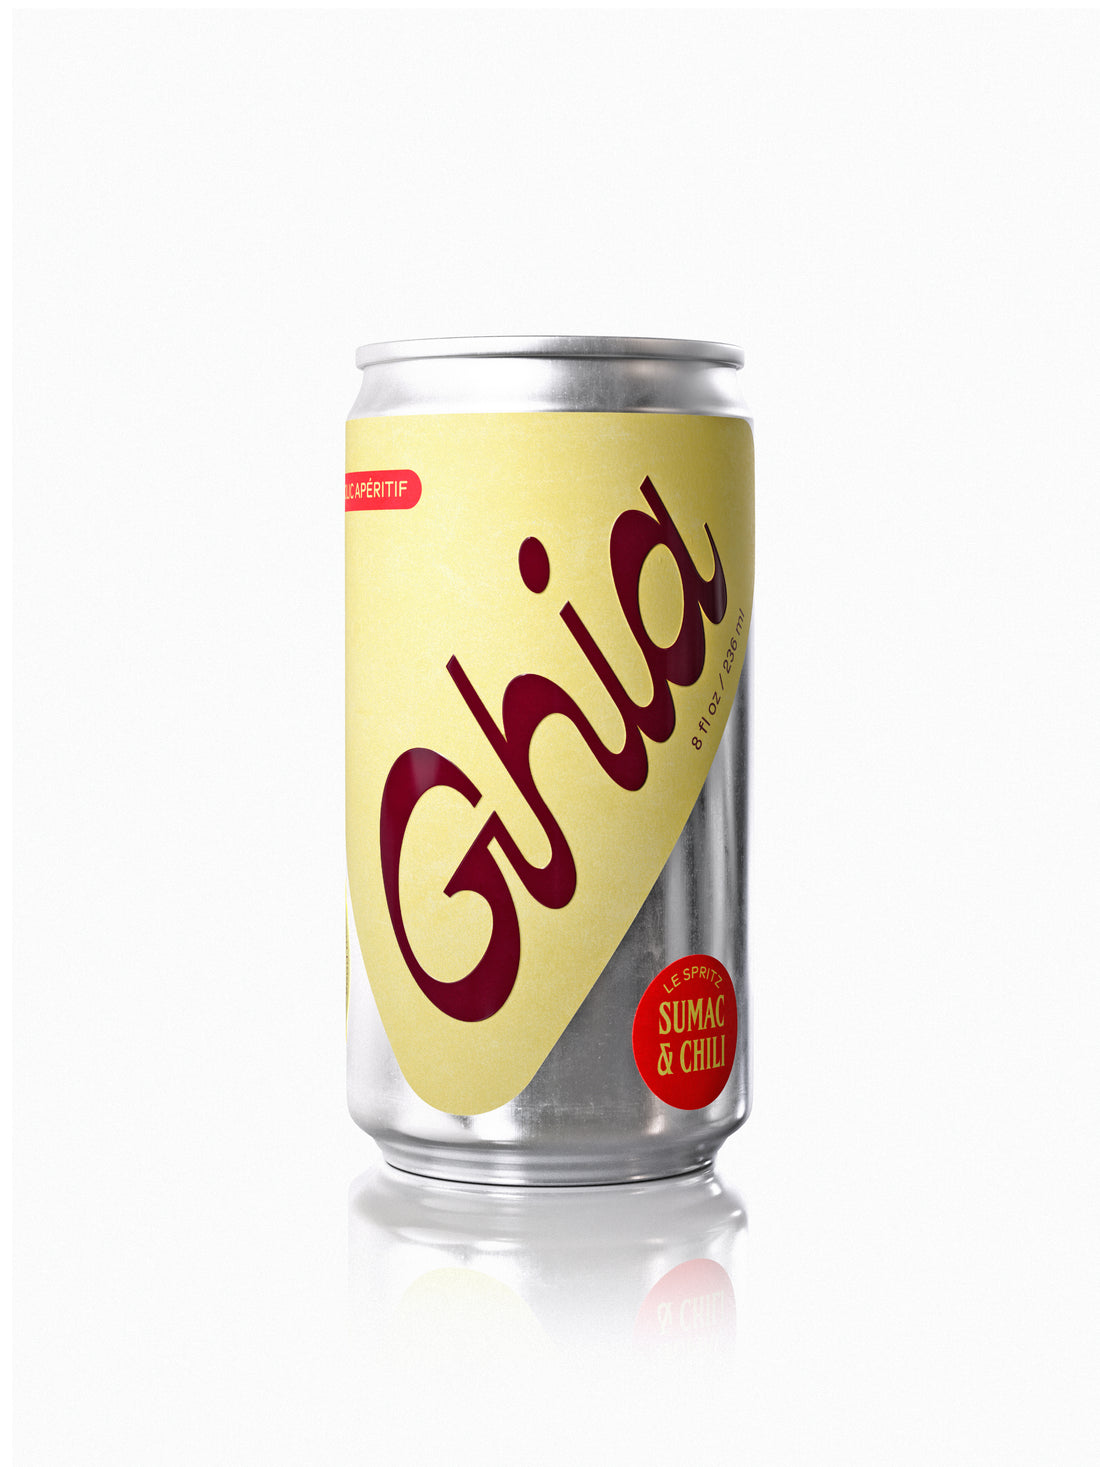 Ghia - Non-Alcoholic Sumac & Chili - Single Can - Boisson — Brooklyn's Non-Alcoholic Spirits, Beer, Wine, and Home Bar Shop in Cobble Hill